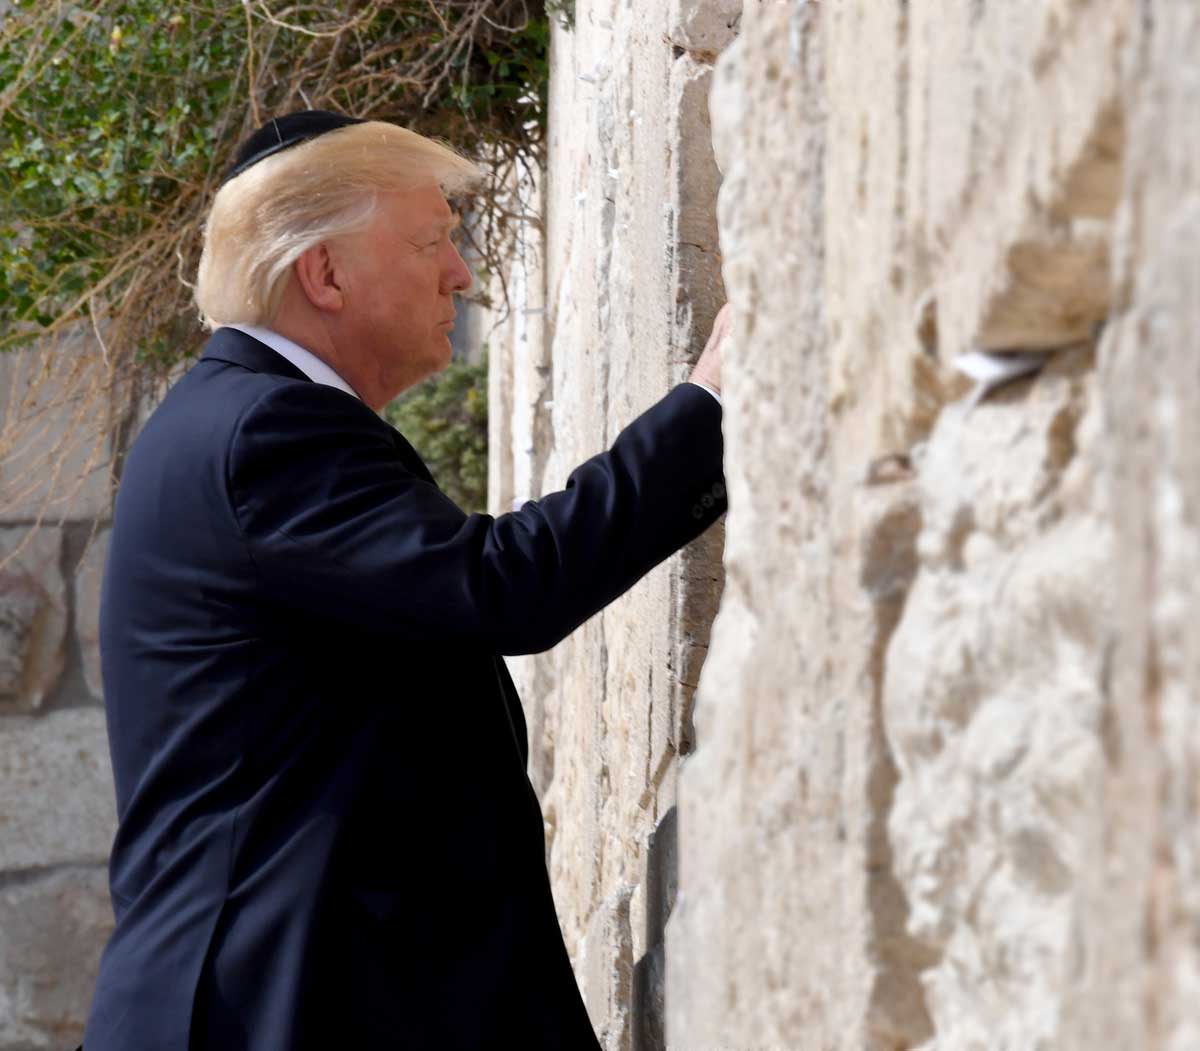 "Who paid for you?" he whispered. But the old wall keeps her secrets